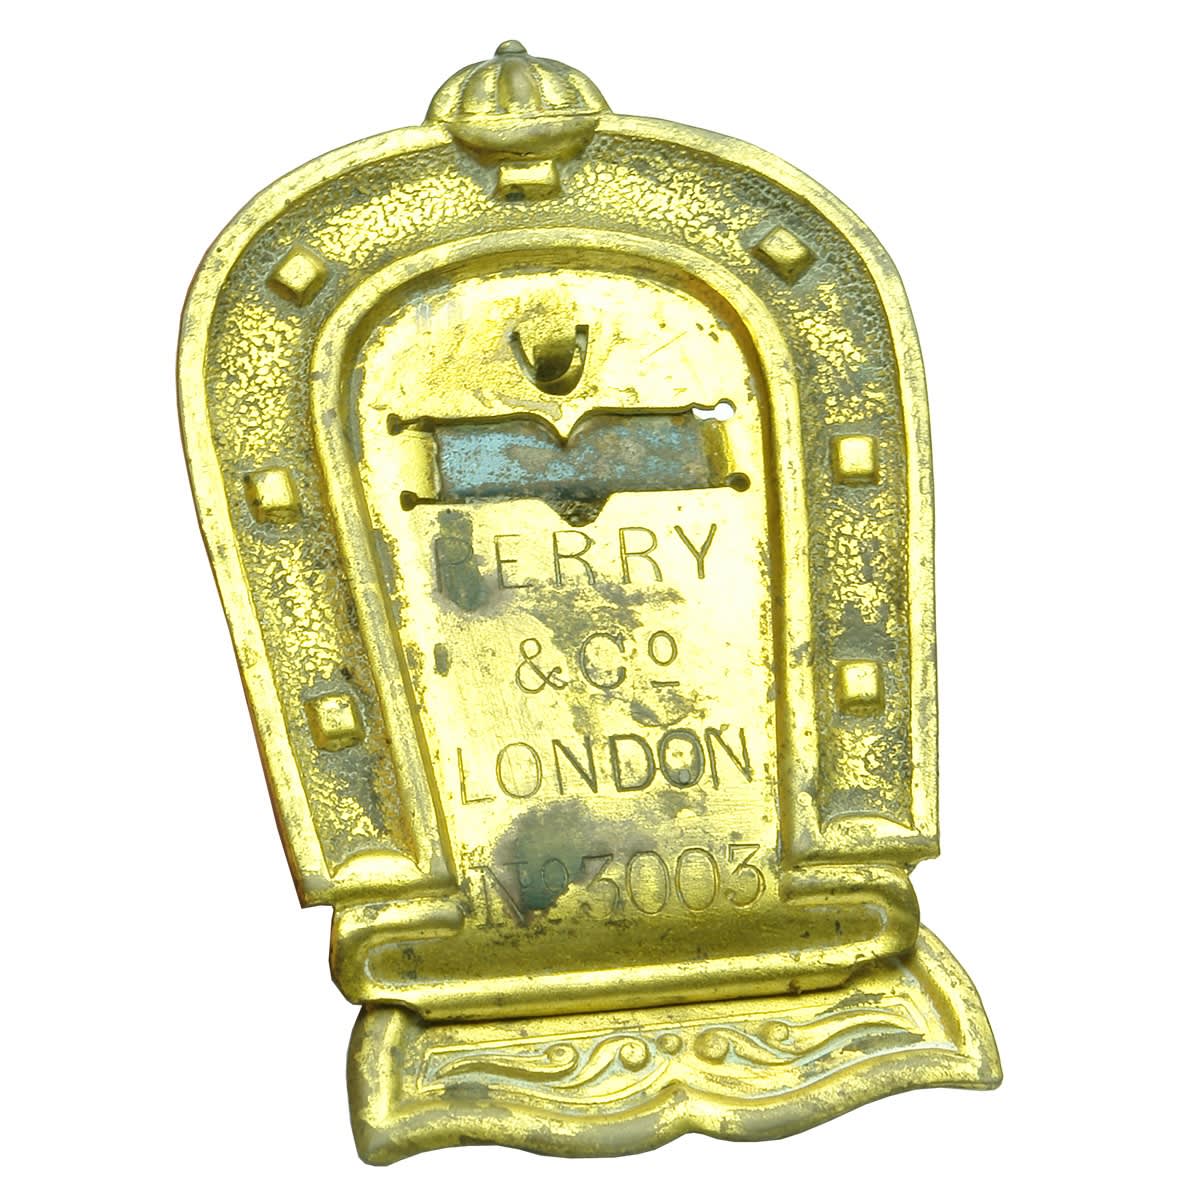 Metalware. Perry & Co, London, No 3003 Good Luck Letter Clip. (United Kingdom)